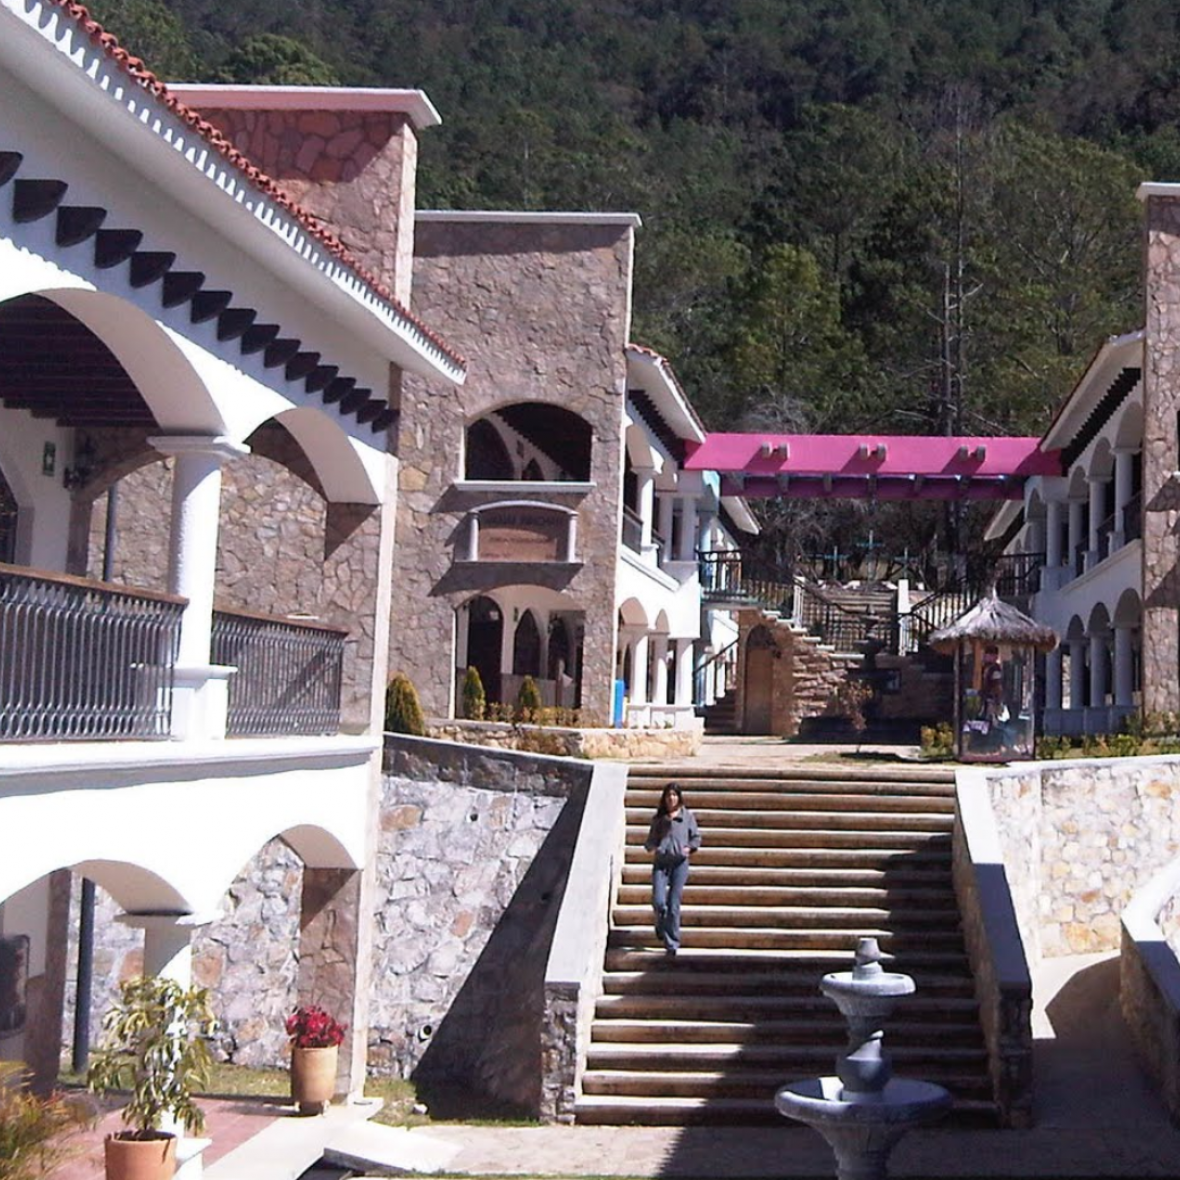 Intercultural University of Chiapas outdoor area with white steps, pink roof, and various balconies